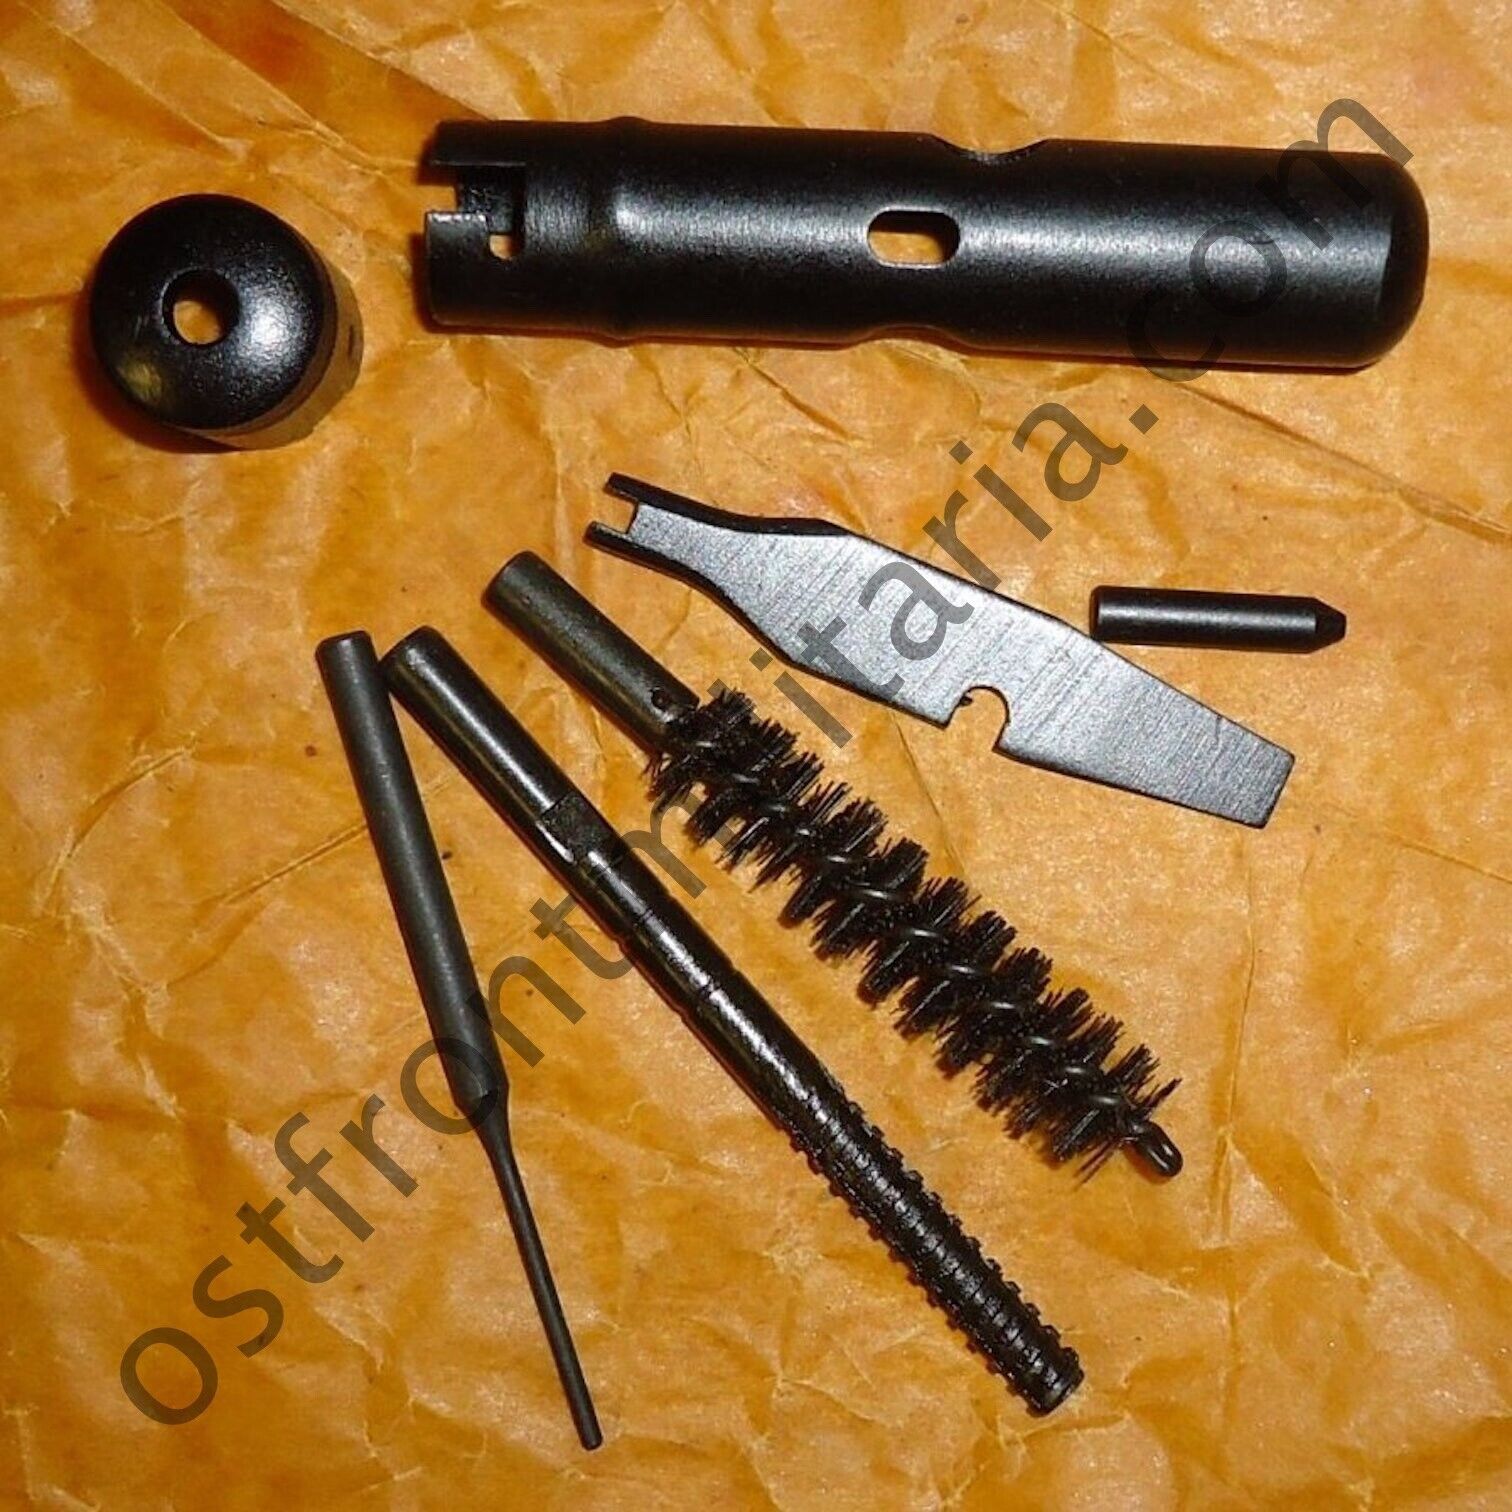 Original Soviet 7.62x39mm rifles buttstock cleaning and tool kit